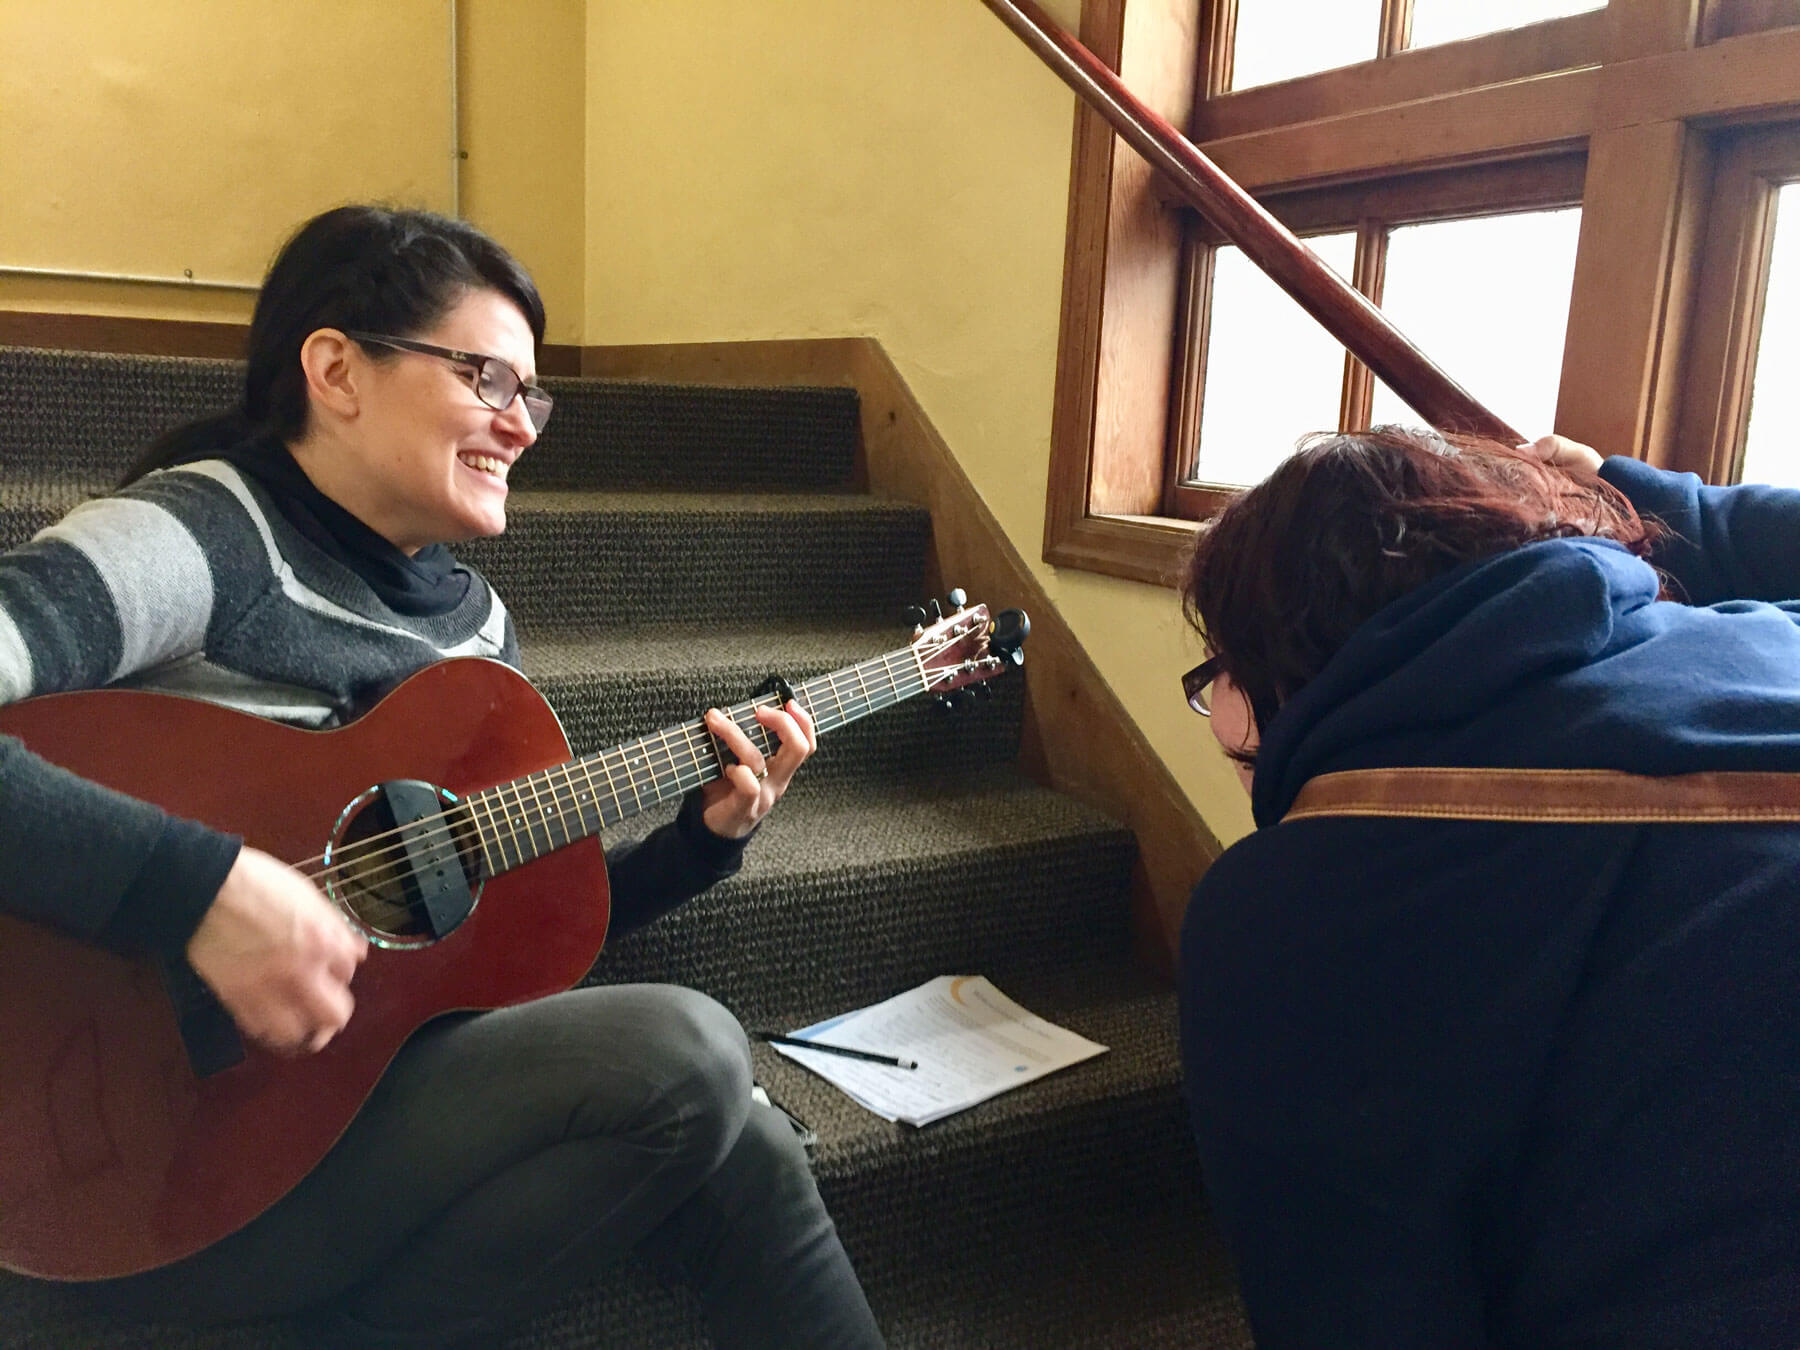 A singer-songwriter writes music with a mom